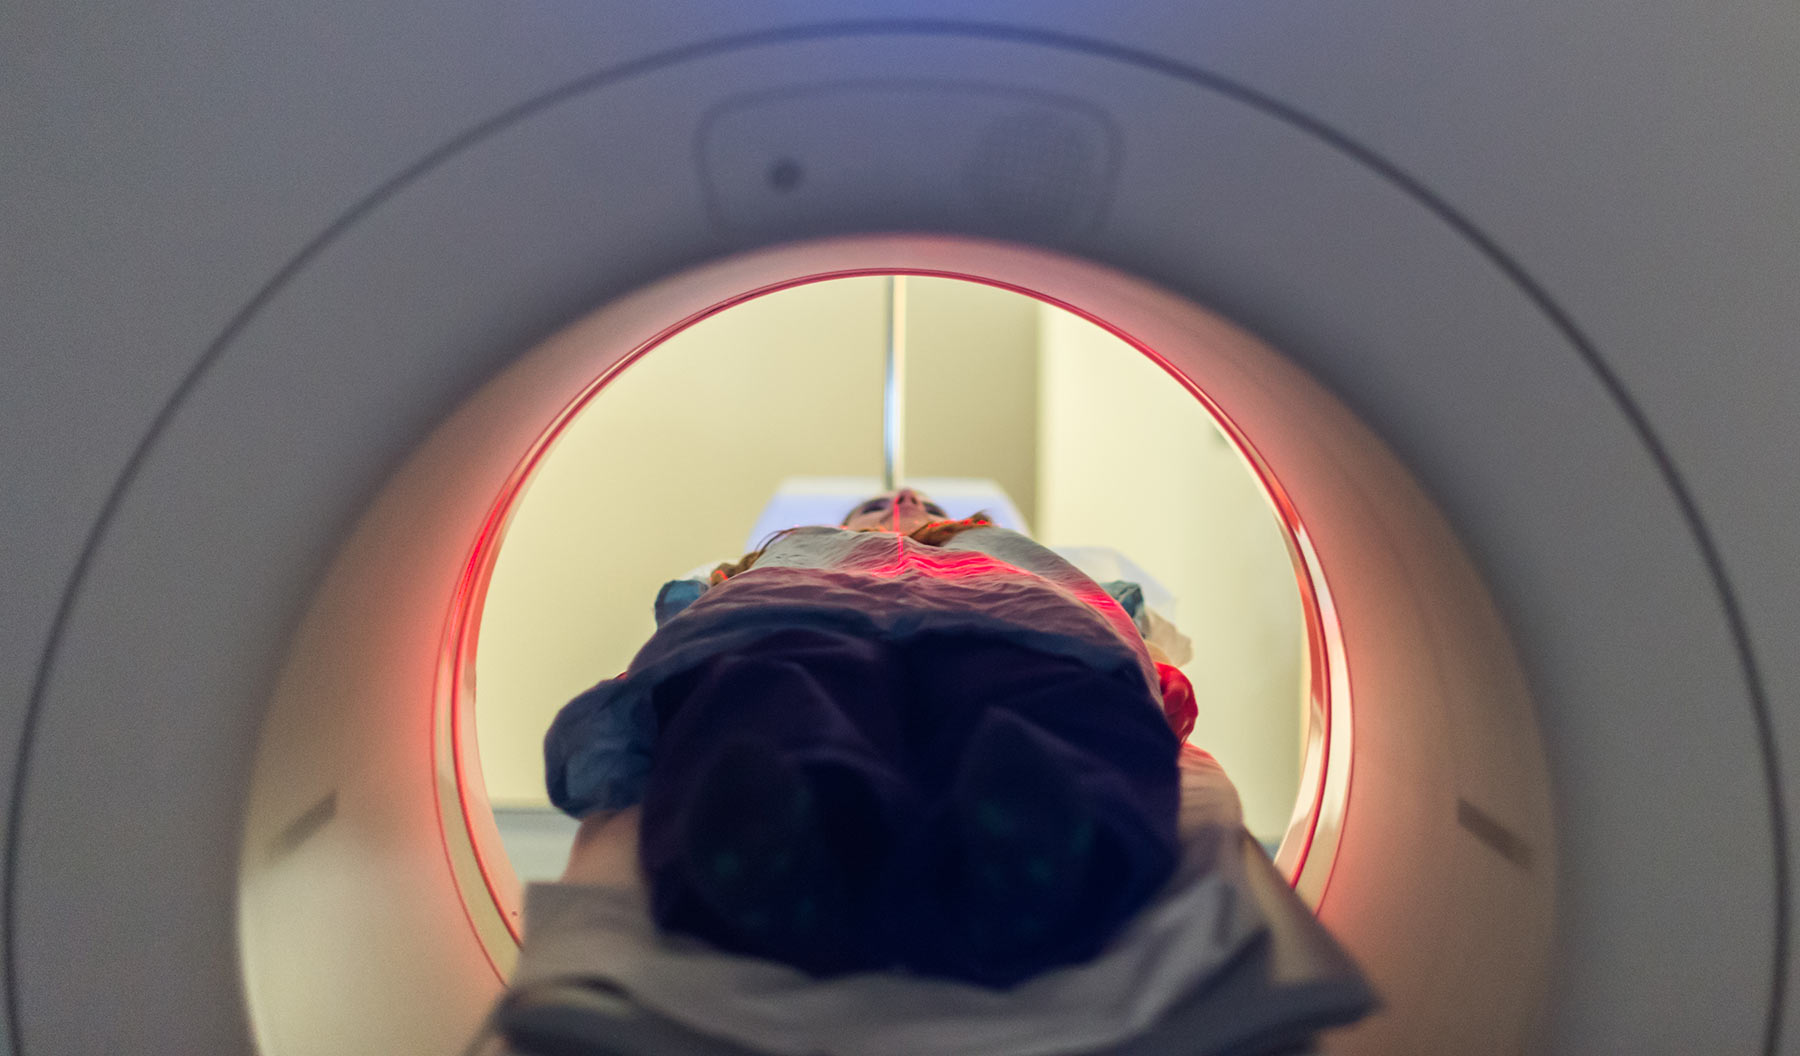 Internal shot of a patient entering into a CT scanner feet-first